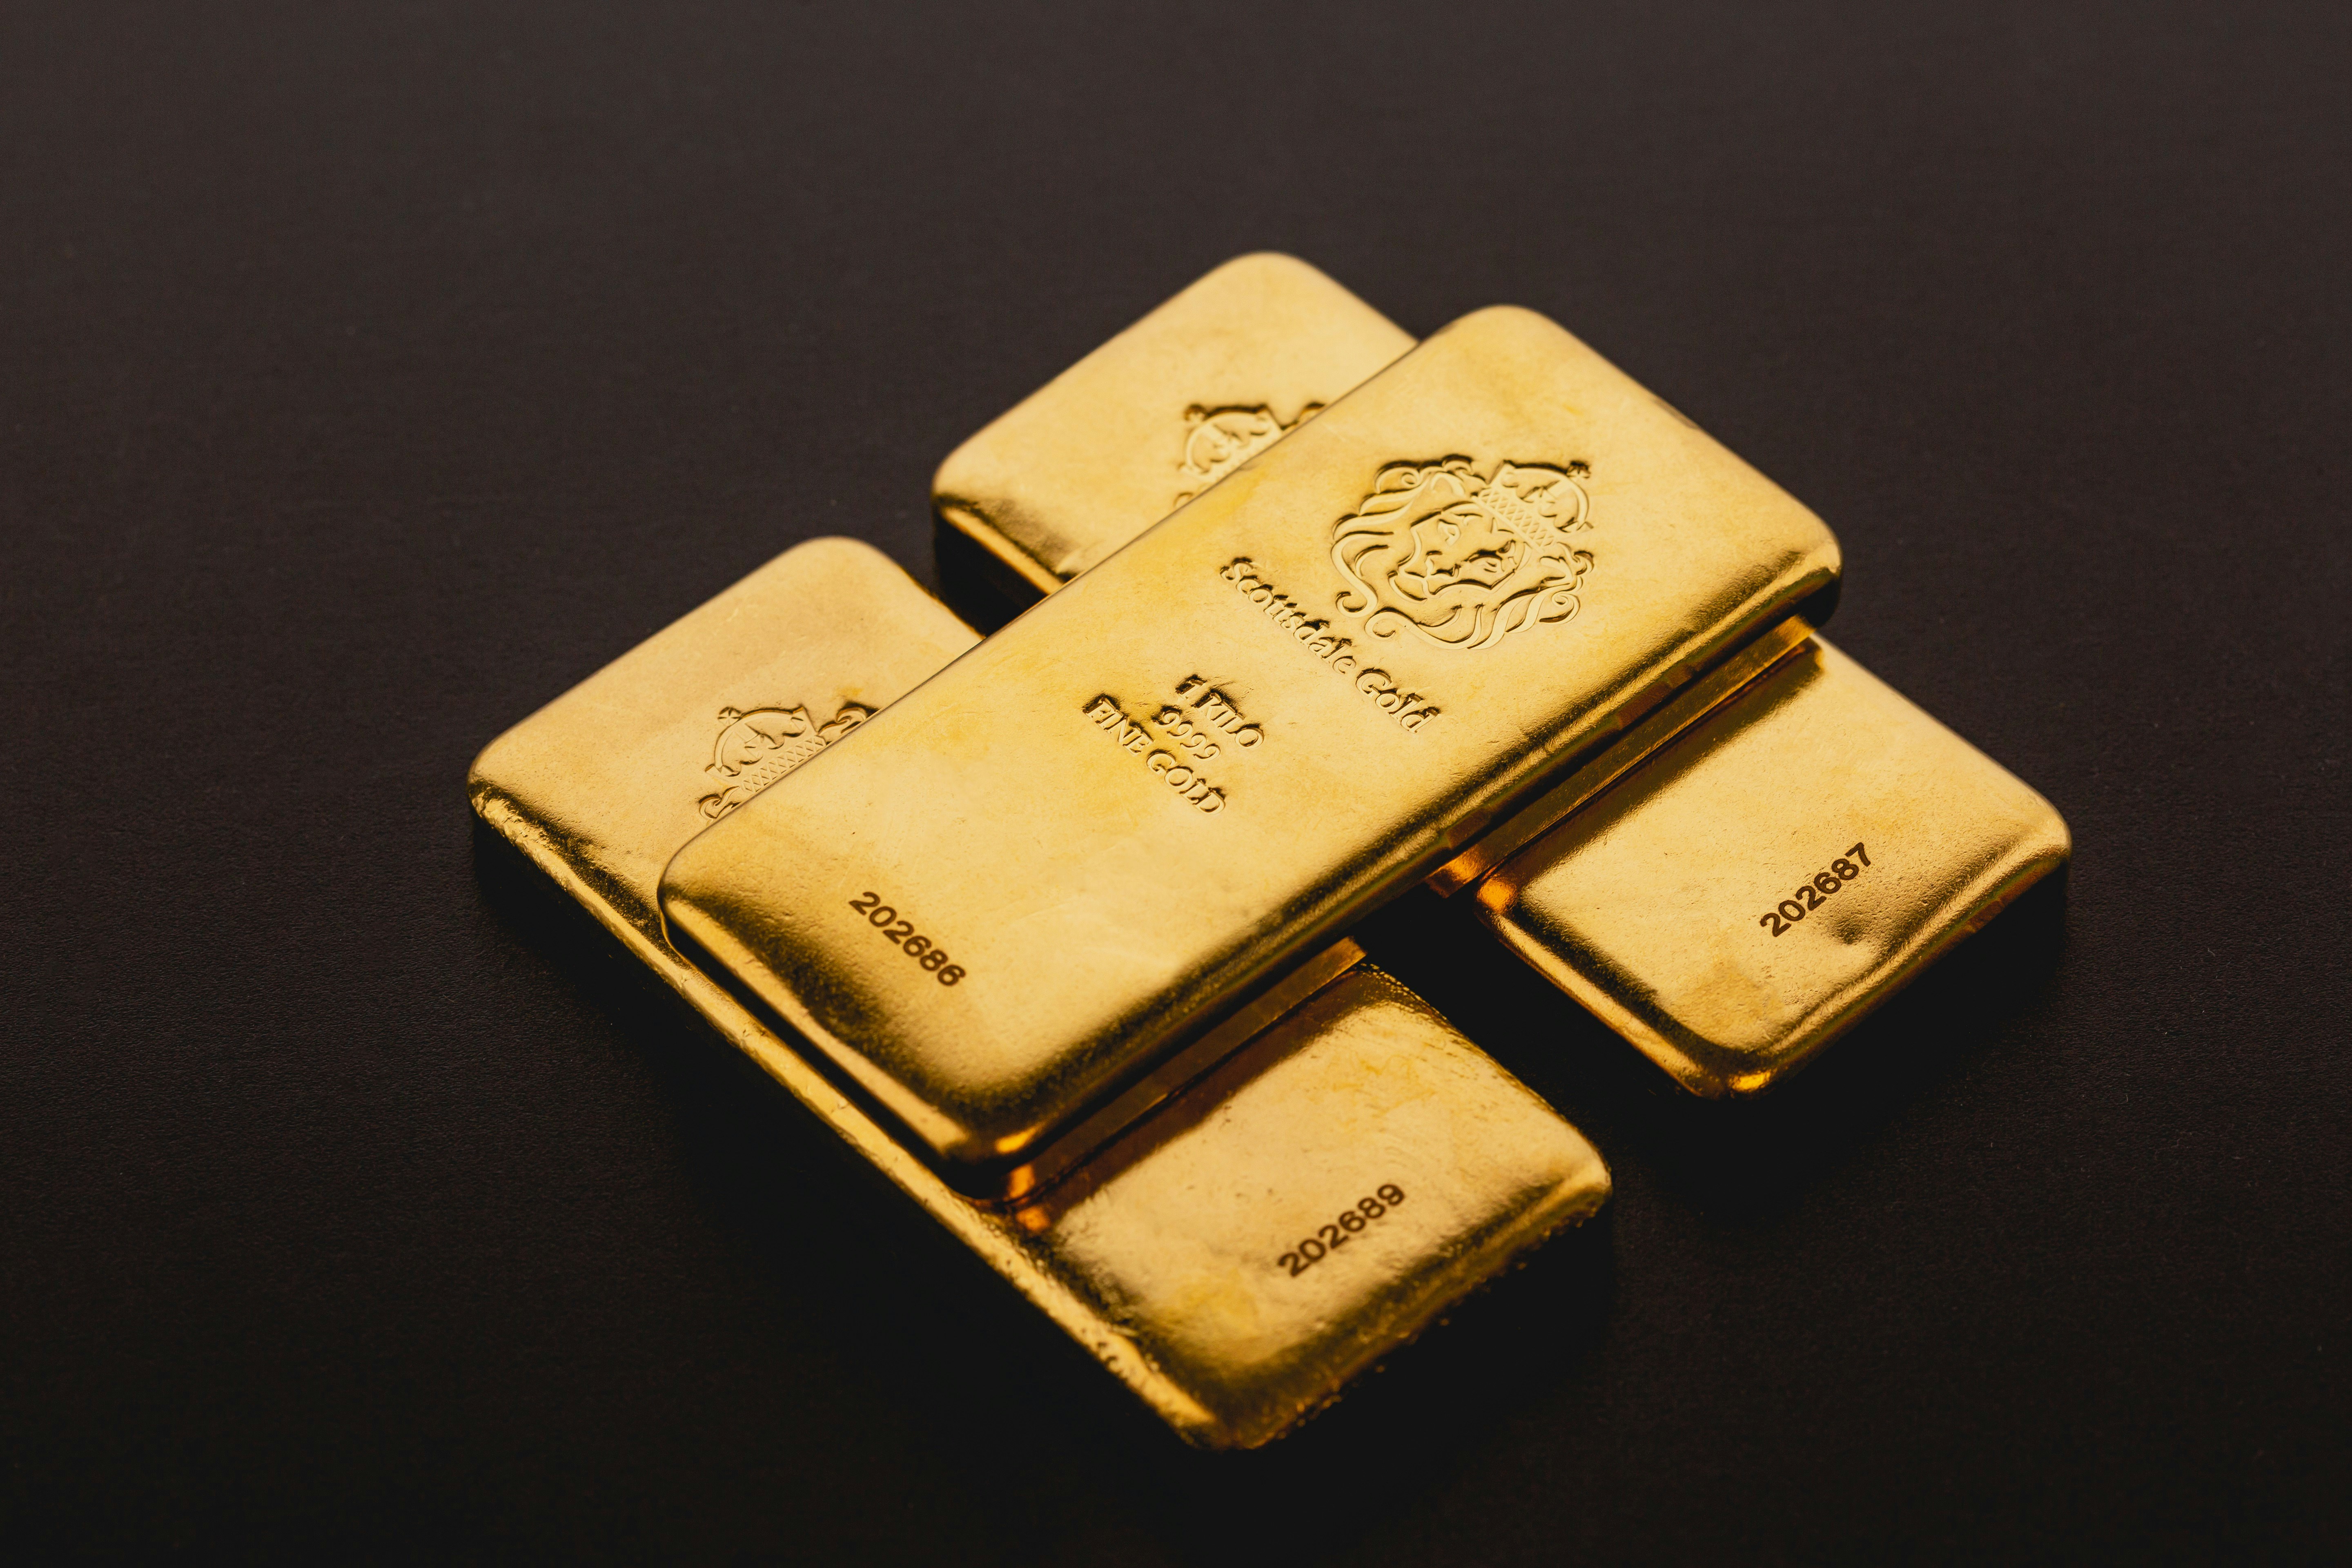 Beautiful 1 Kilogram Gold Bullion Bars by Scottsdale Mint sitting on a dark background. Please give a shoutout to Scottsdale Mint if able! Shop online for the most beautiful bullion at ScottsdaleMint.com!